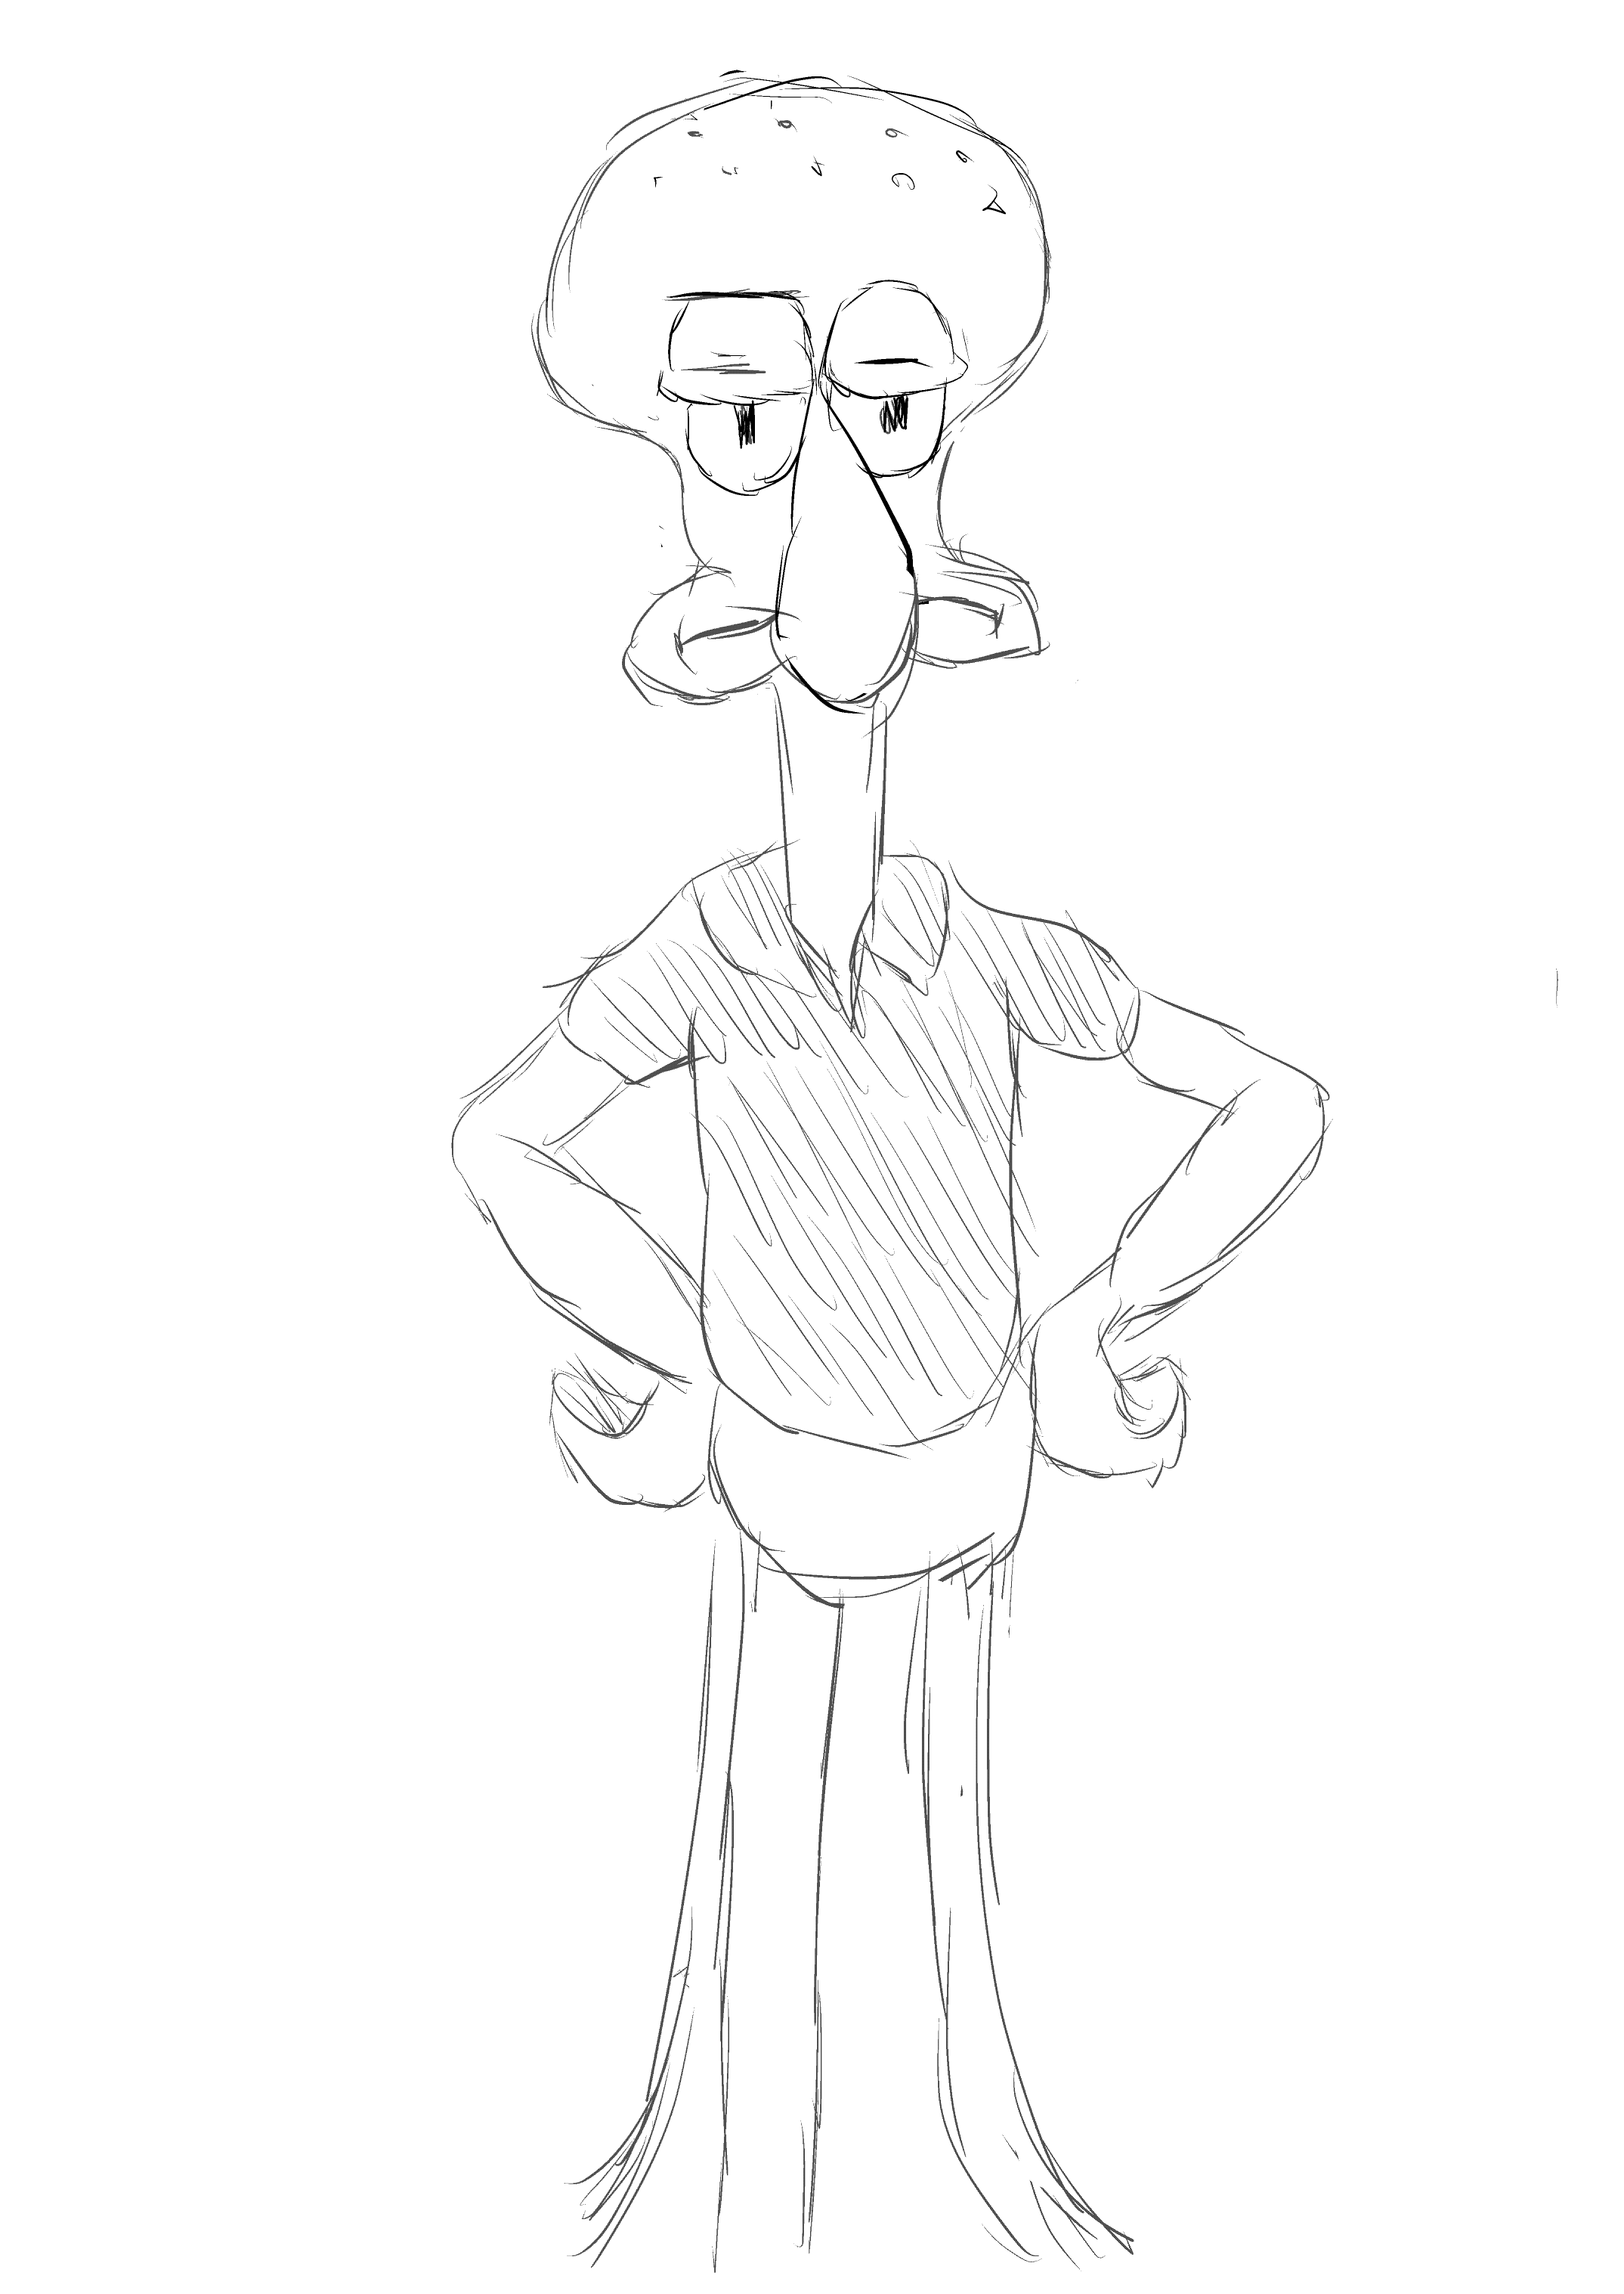 squidward.png